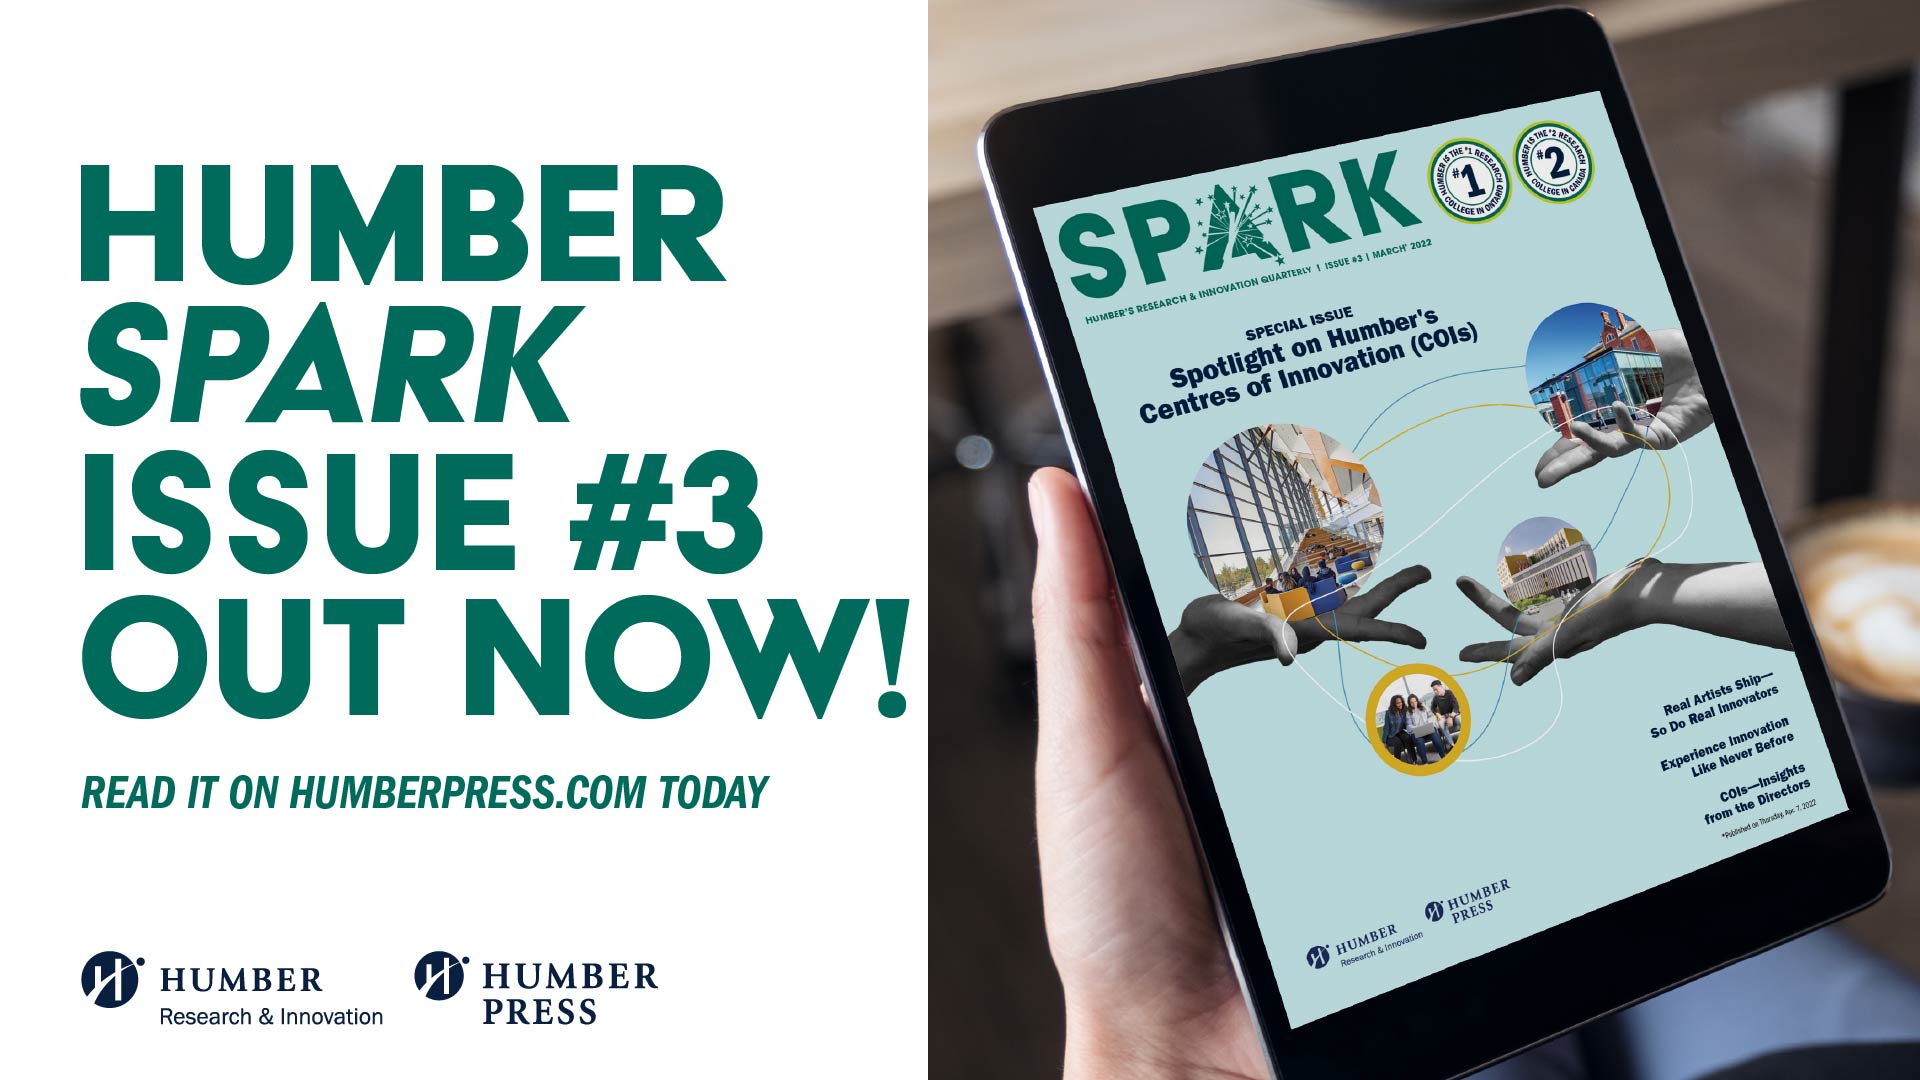 SPARK Issue 3